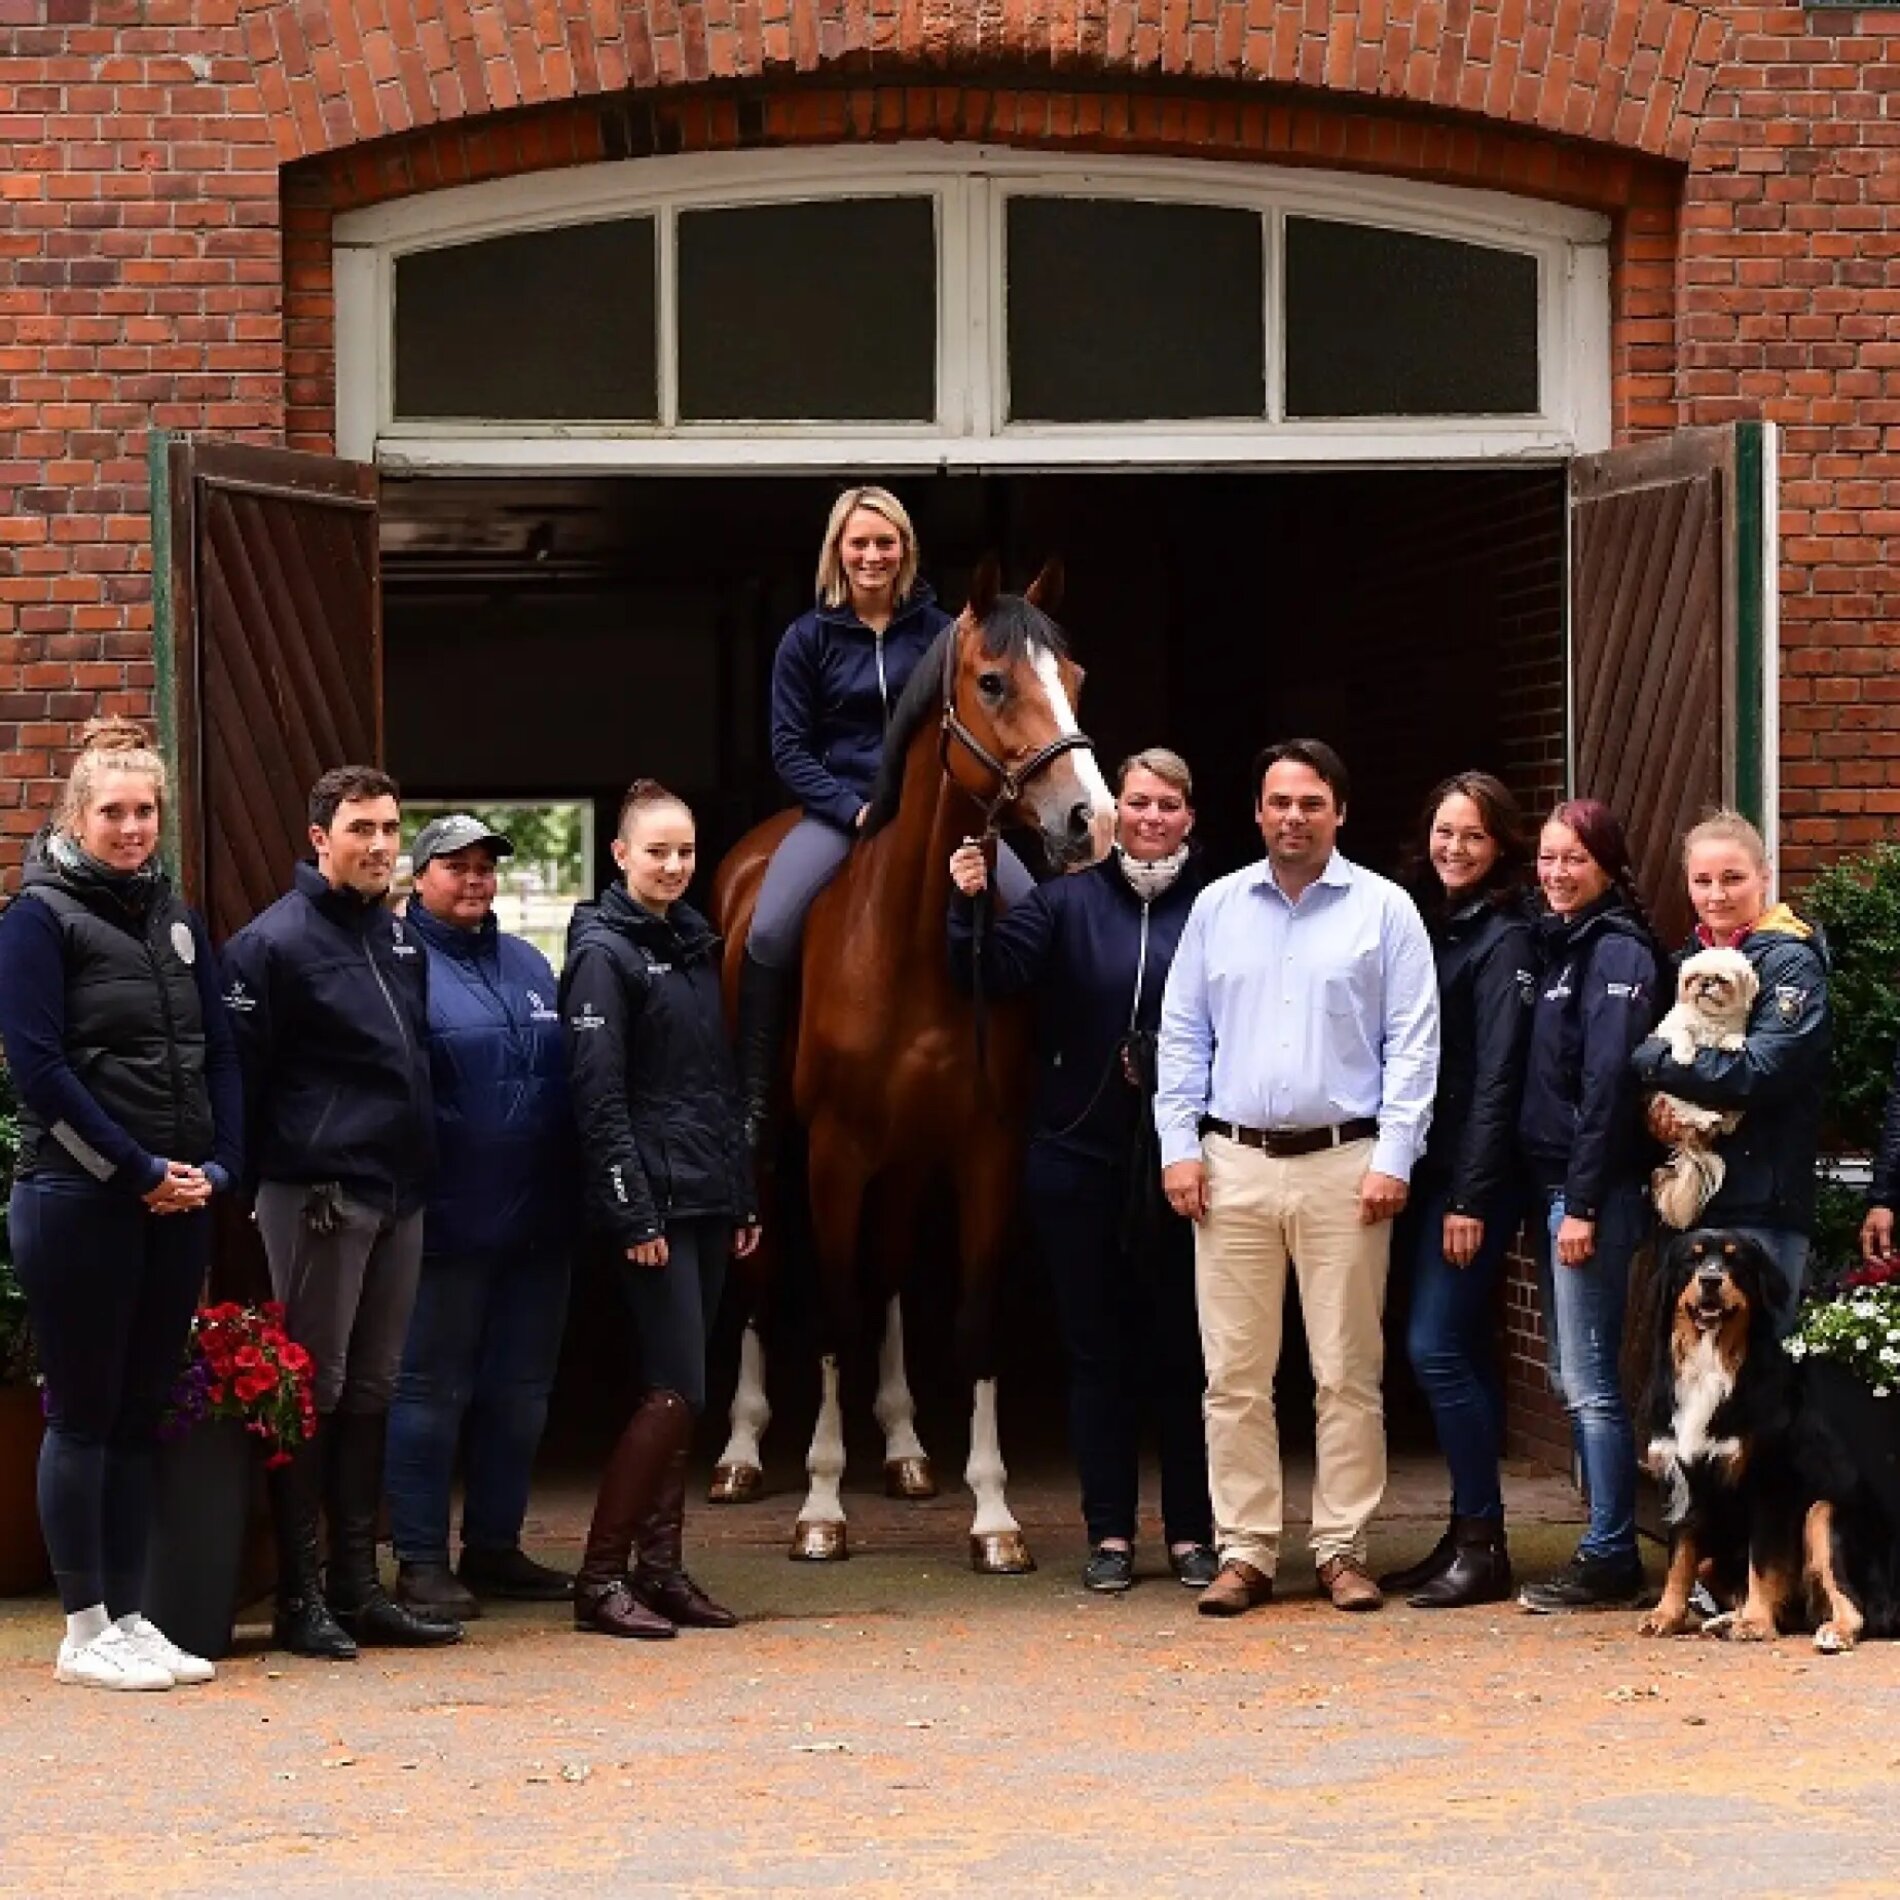 The team of the sales stable